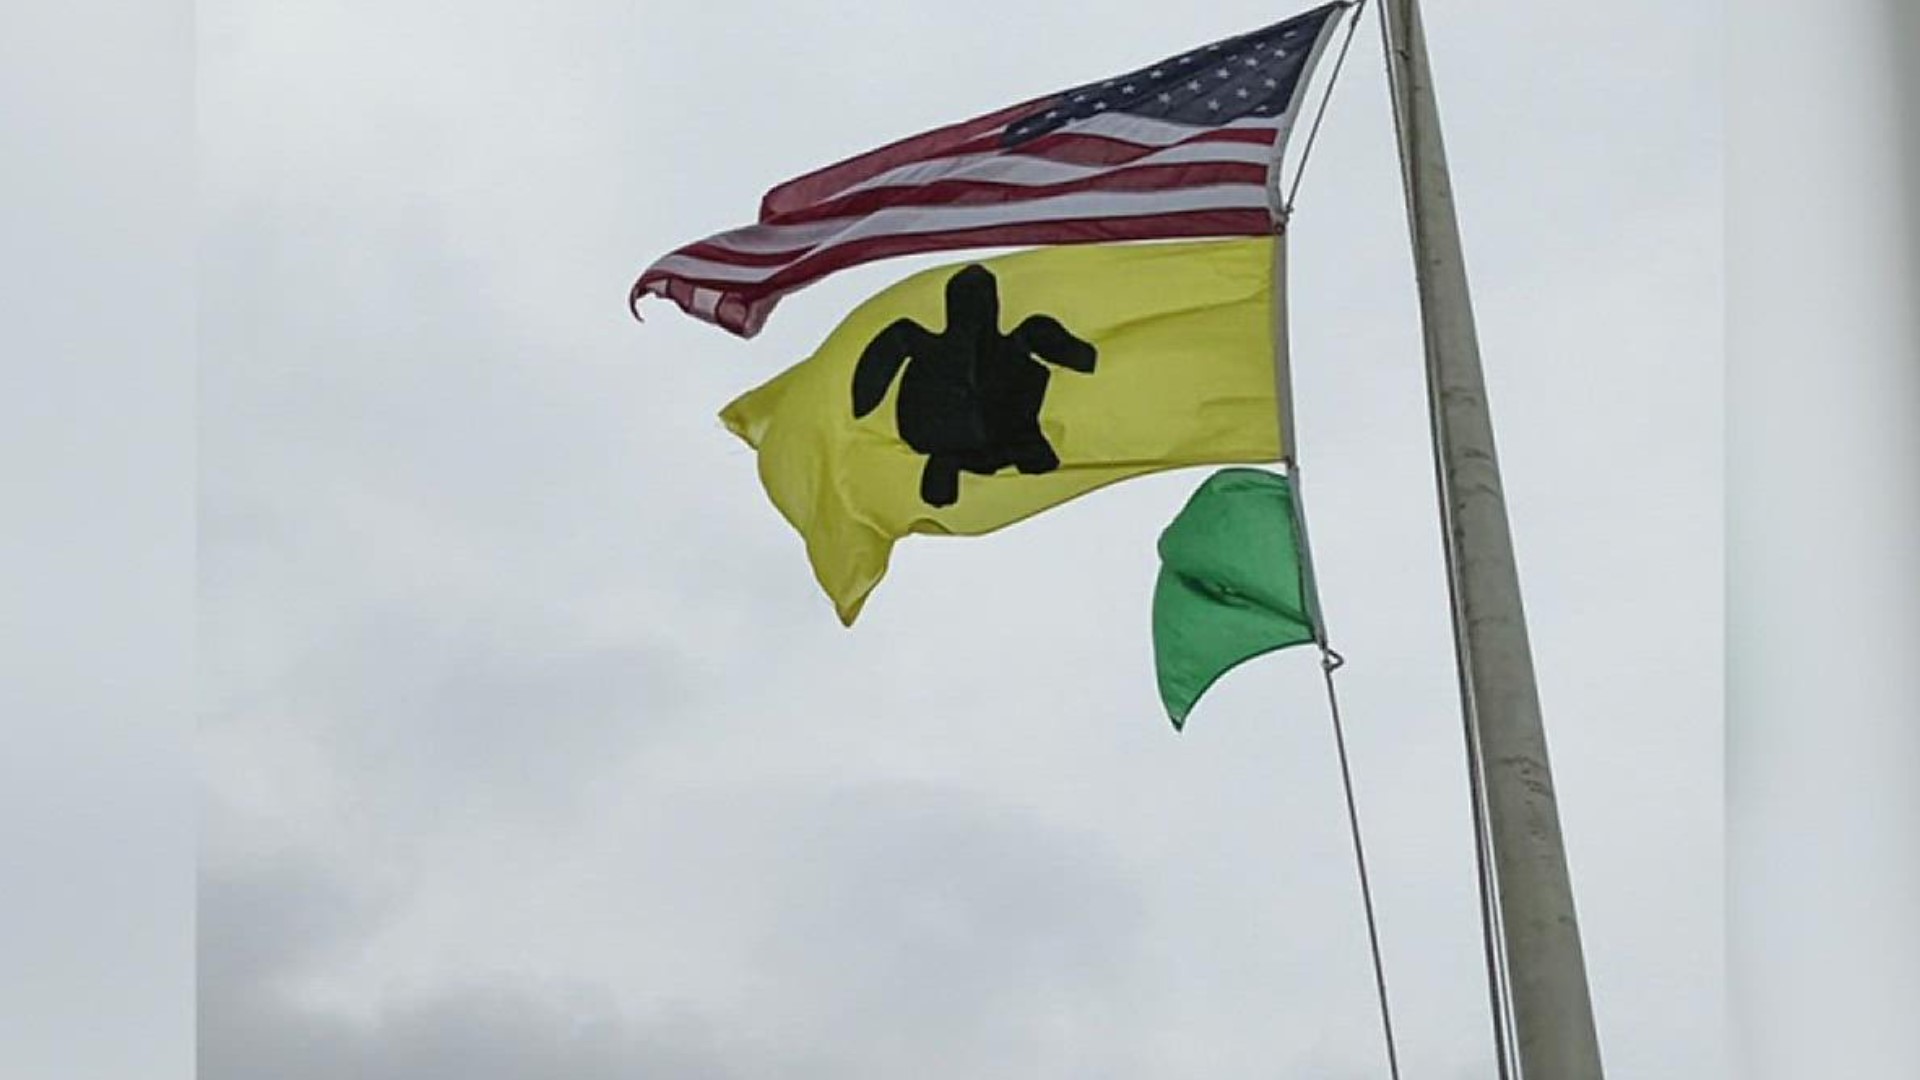 This bright yellow flag is rose whenever Kemps ridley sea turtles are found nesting